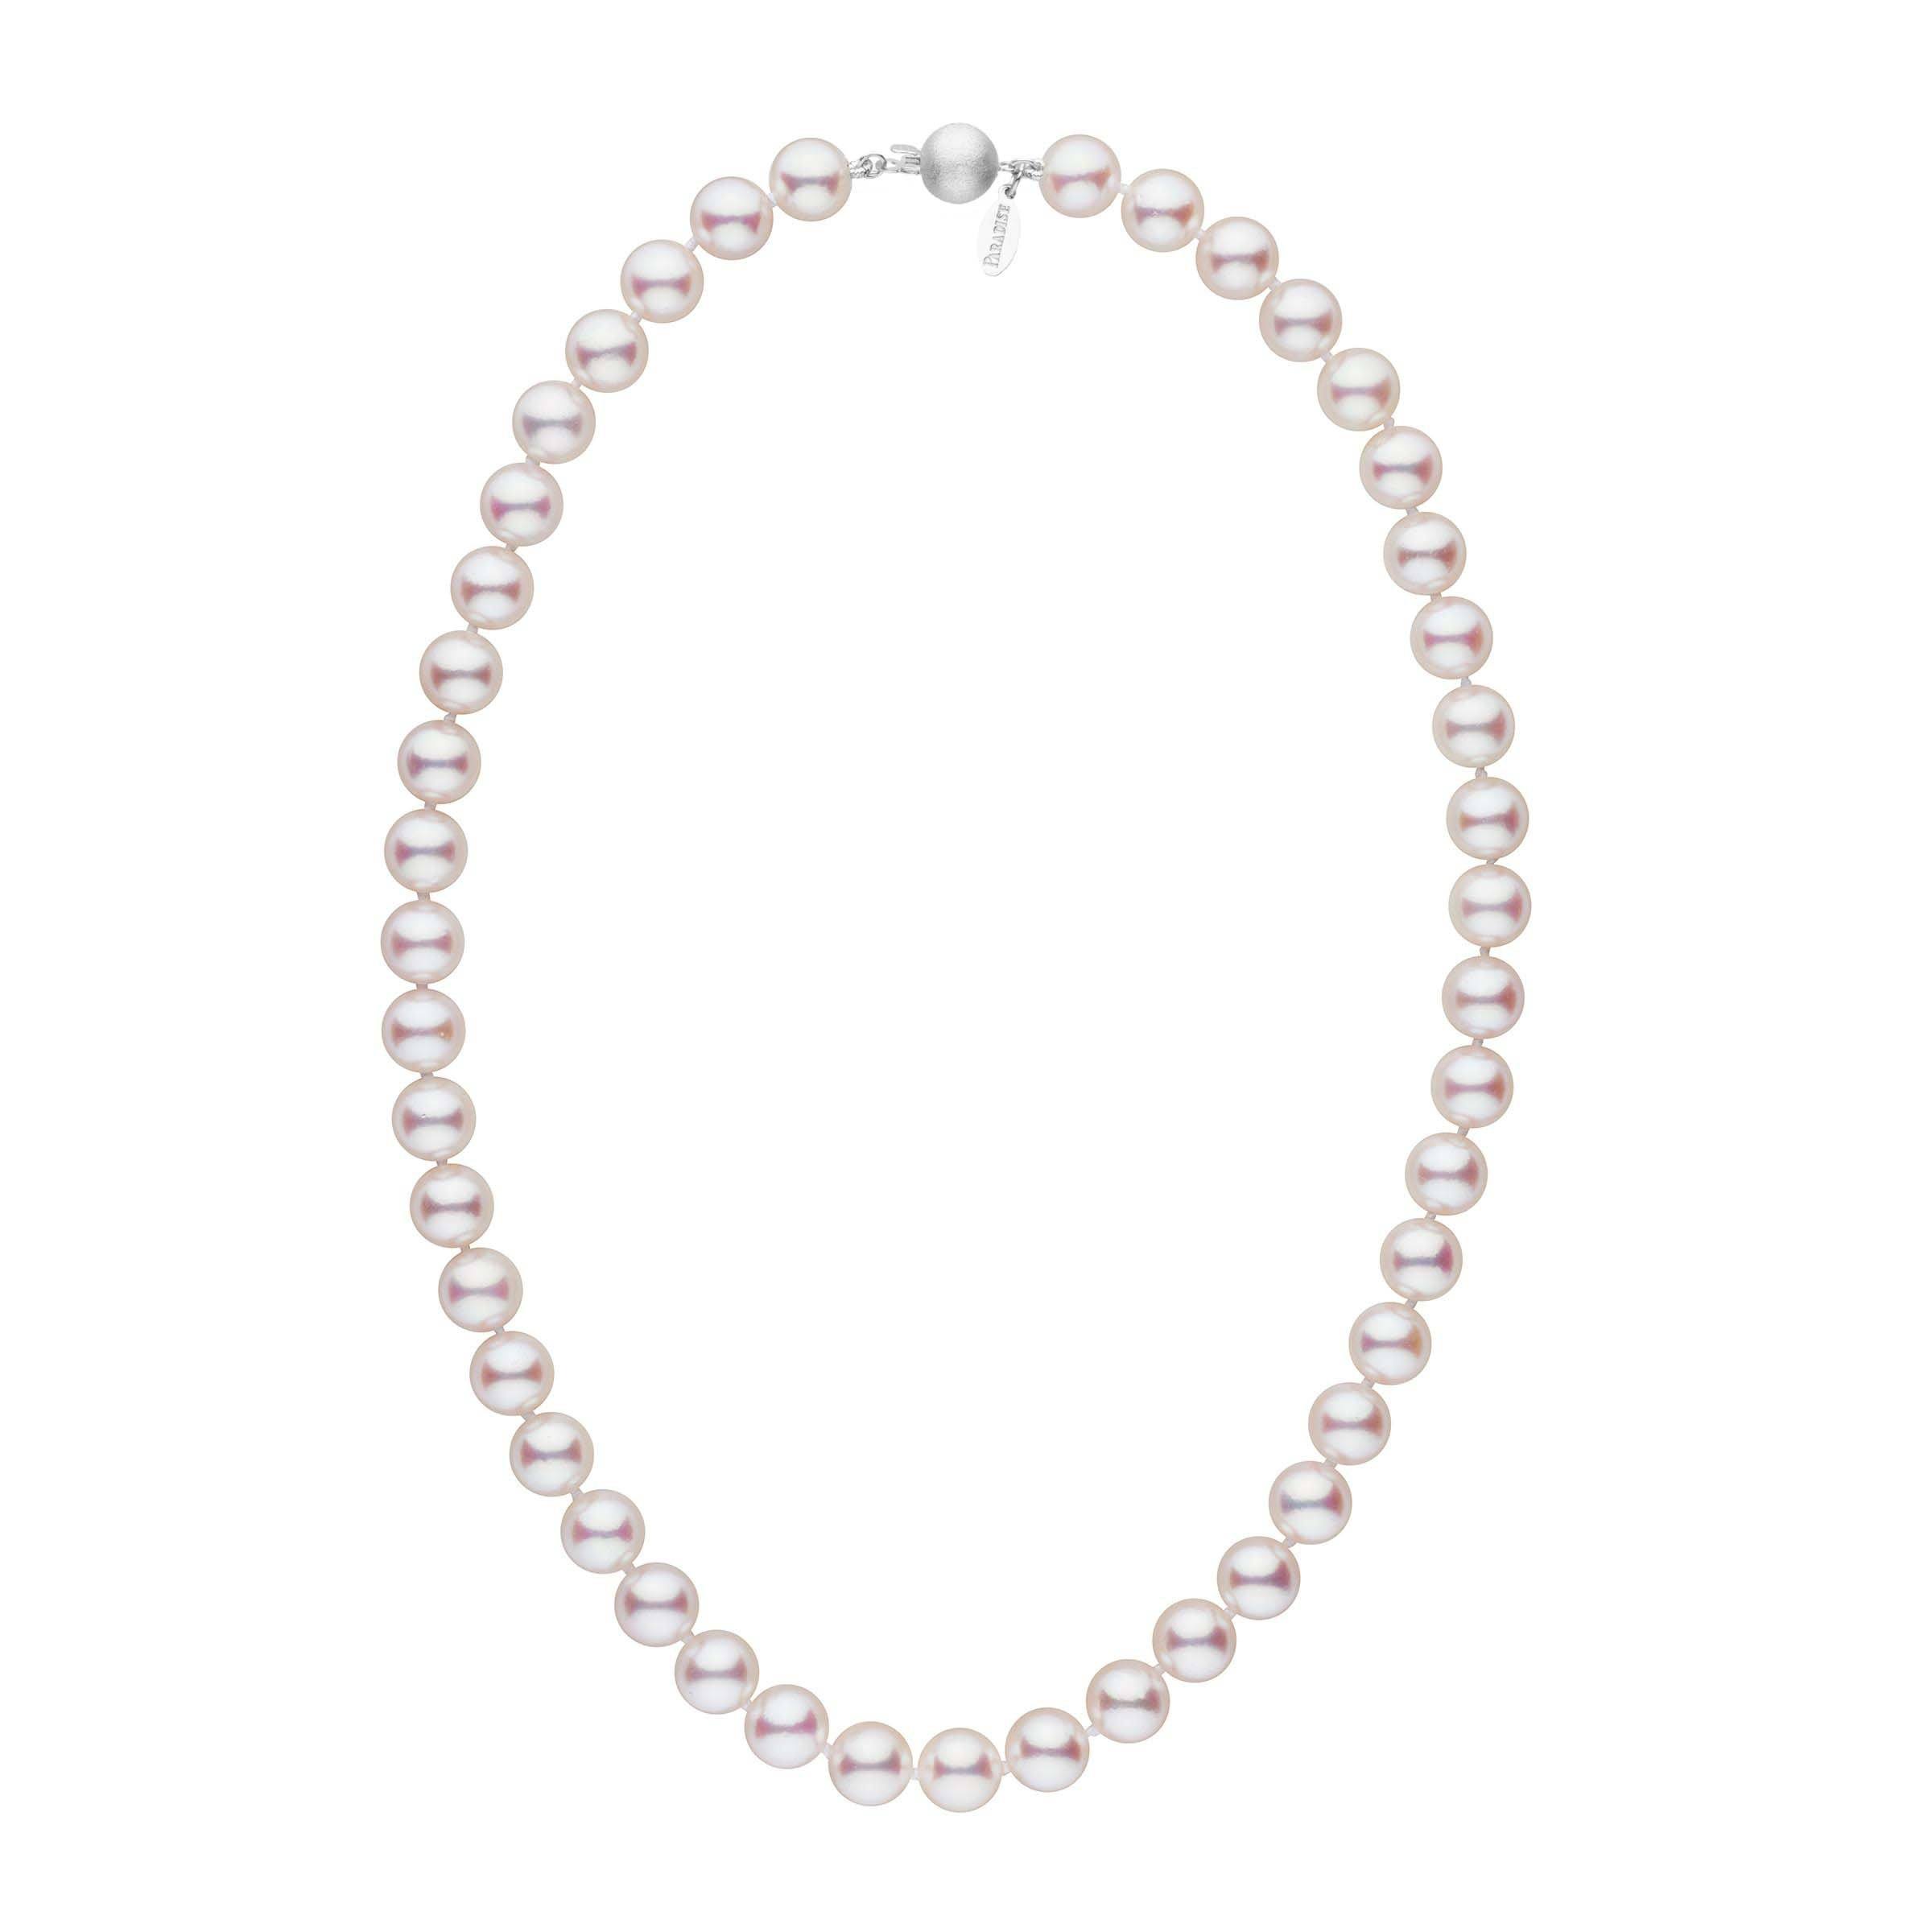 Large, Certified 9.0-9.5 mm 18 Inch White Hanadama Akoya Pearl Necklace white gold matte